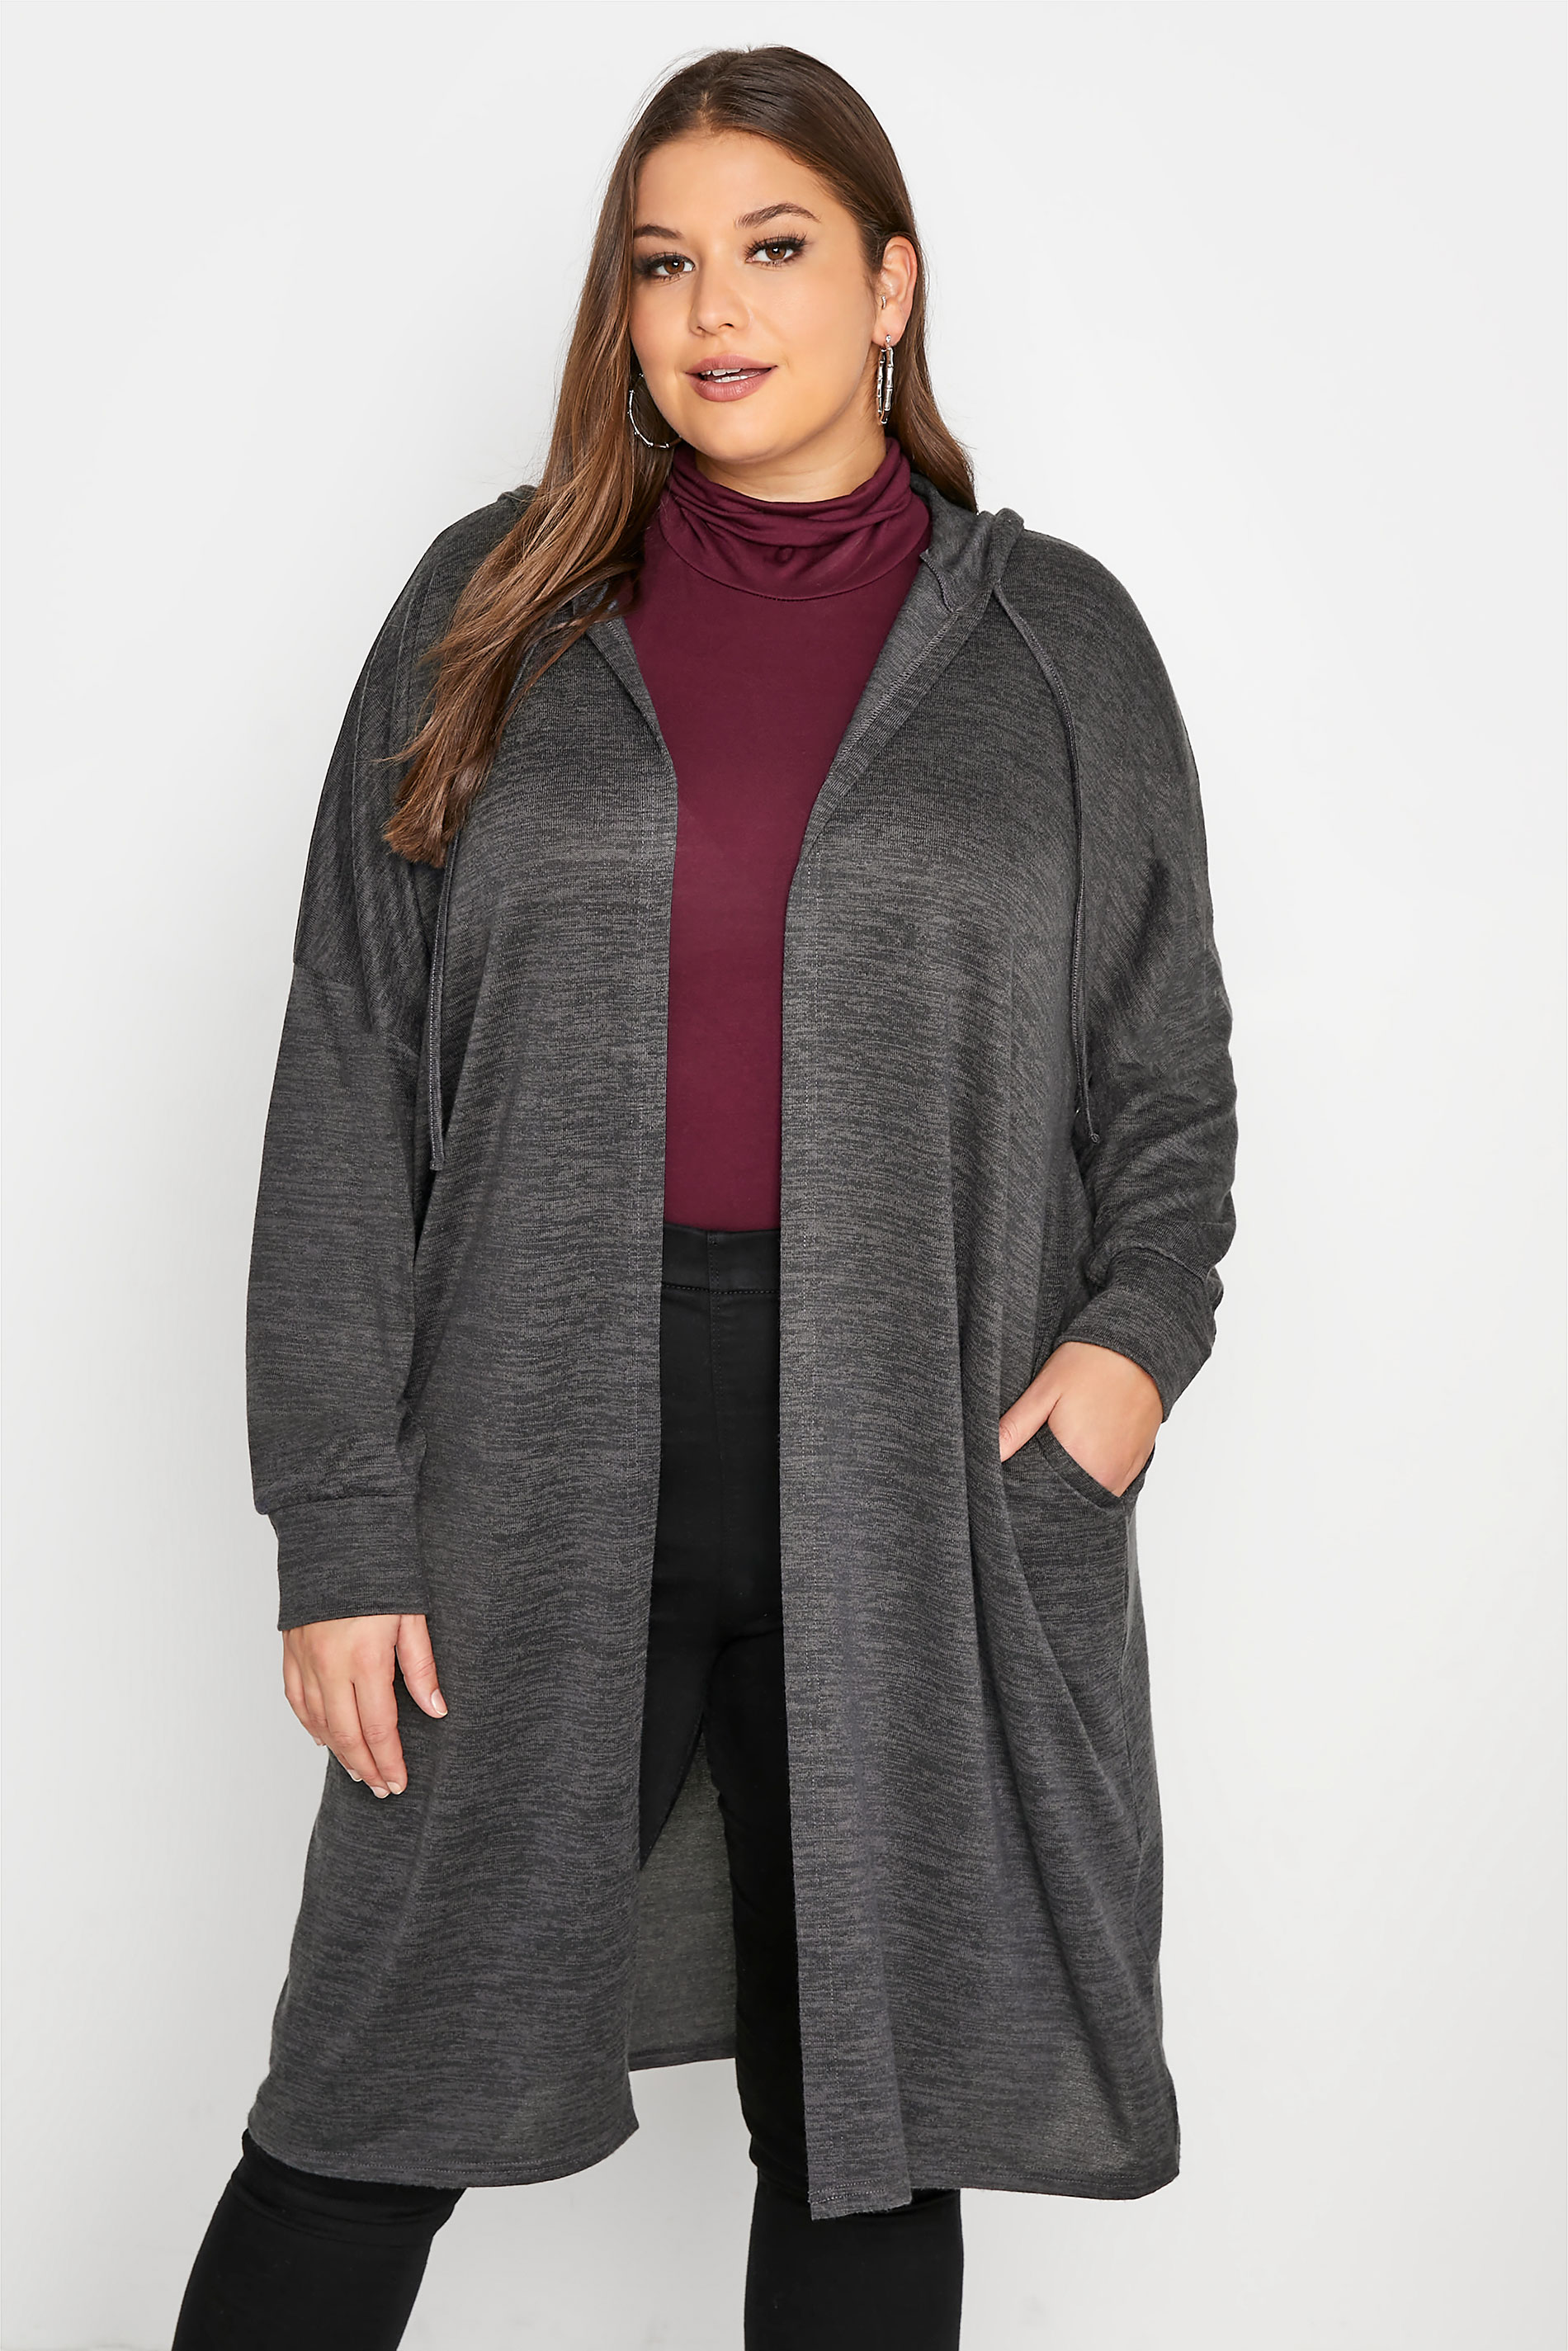 Charcoal Grey Soft Touch Hooded Cardigan_a.jpg